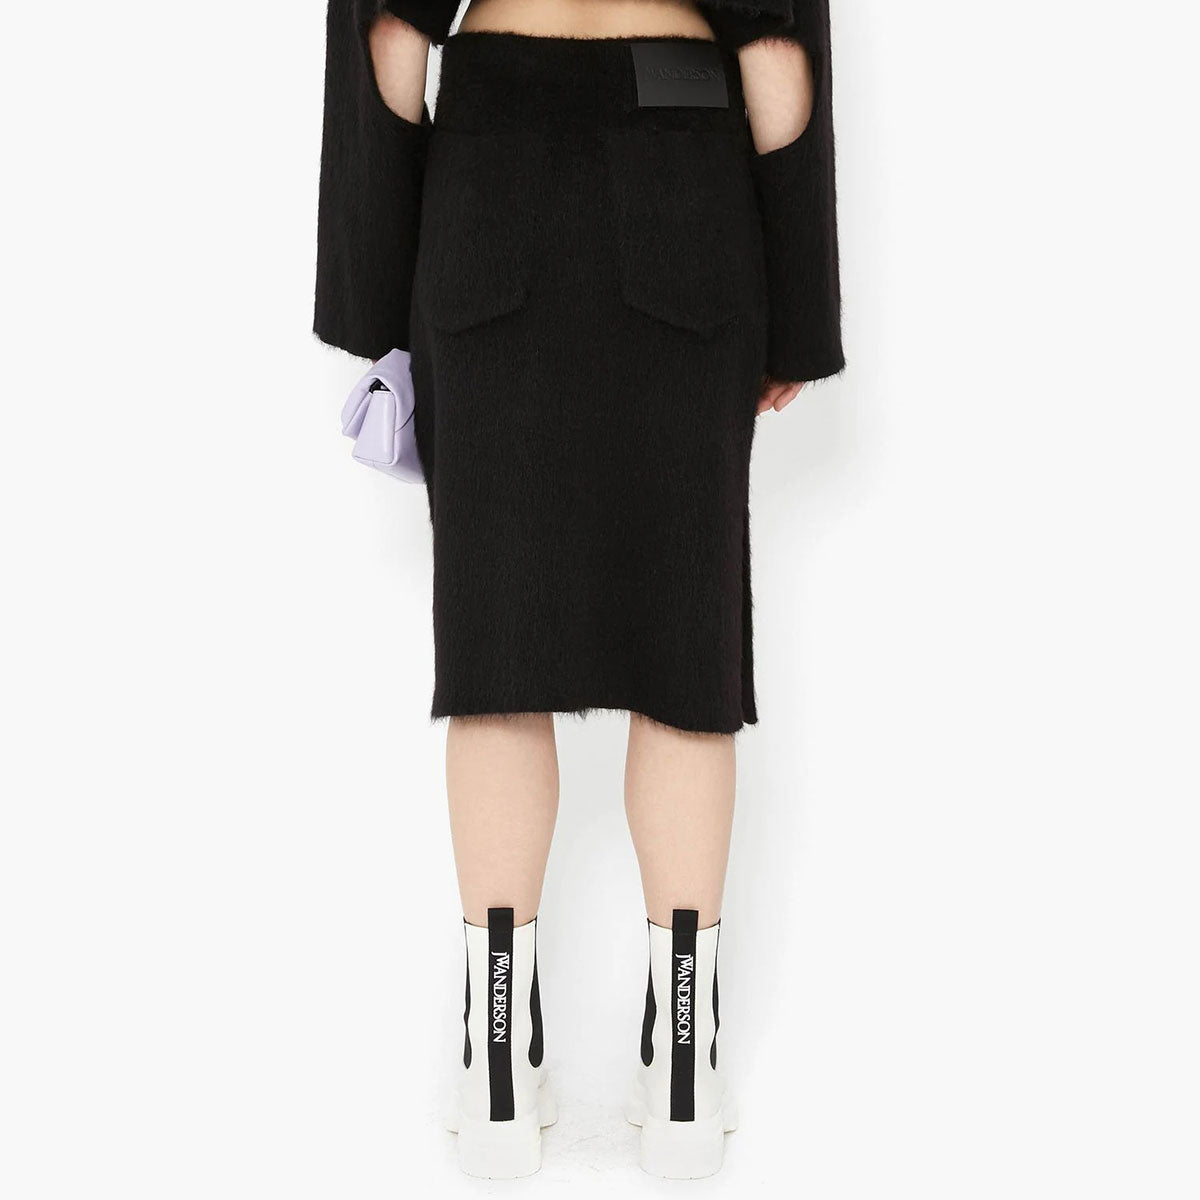 SLIT PENCIL SKIRT - Why are you here?